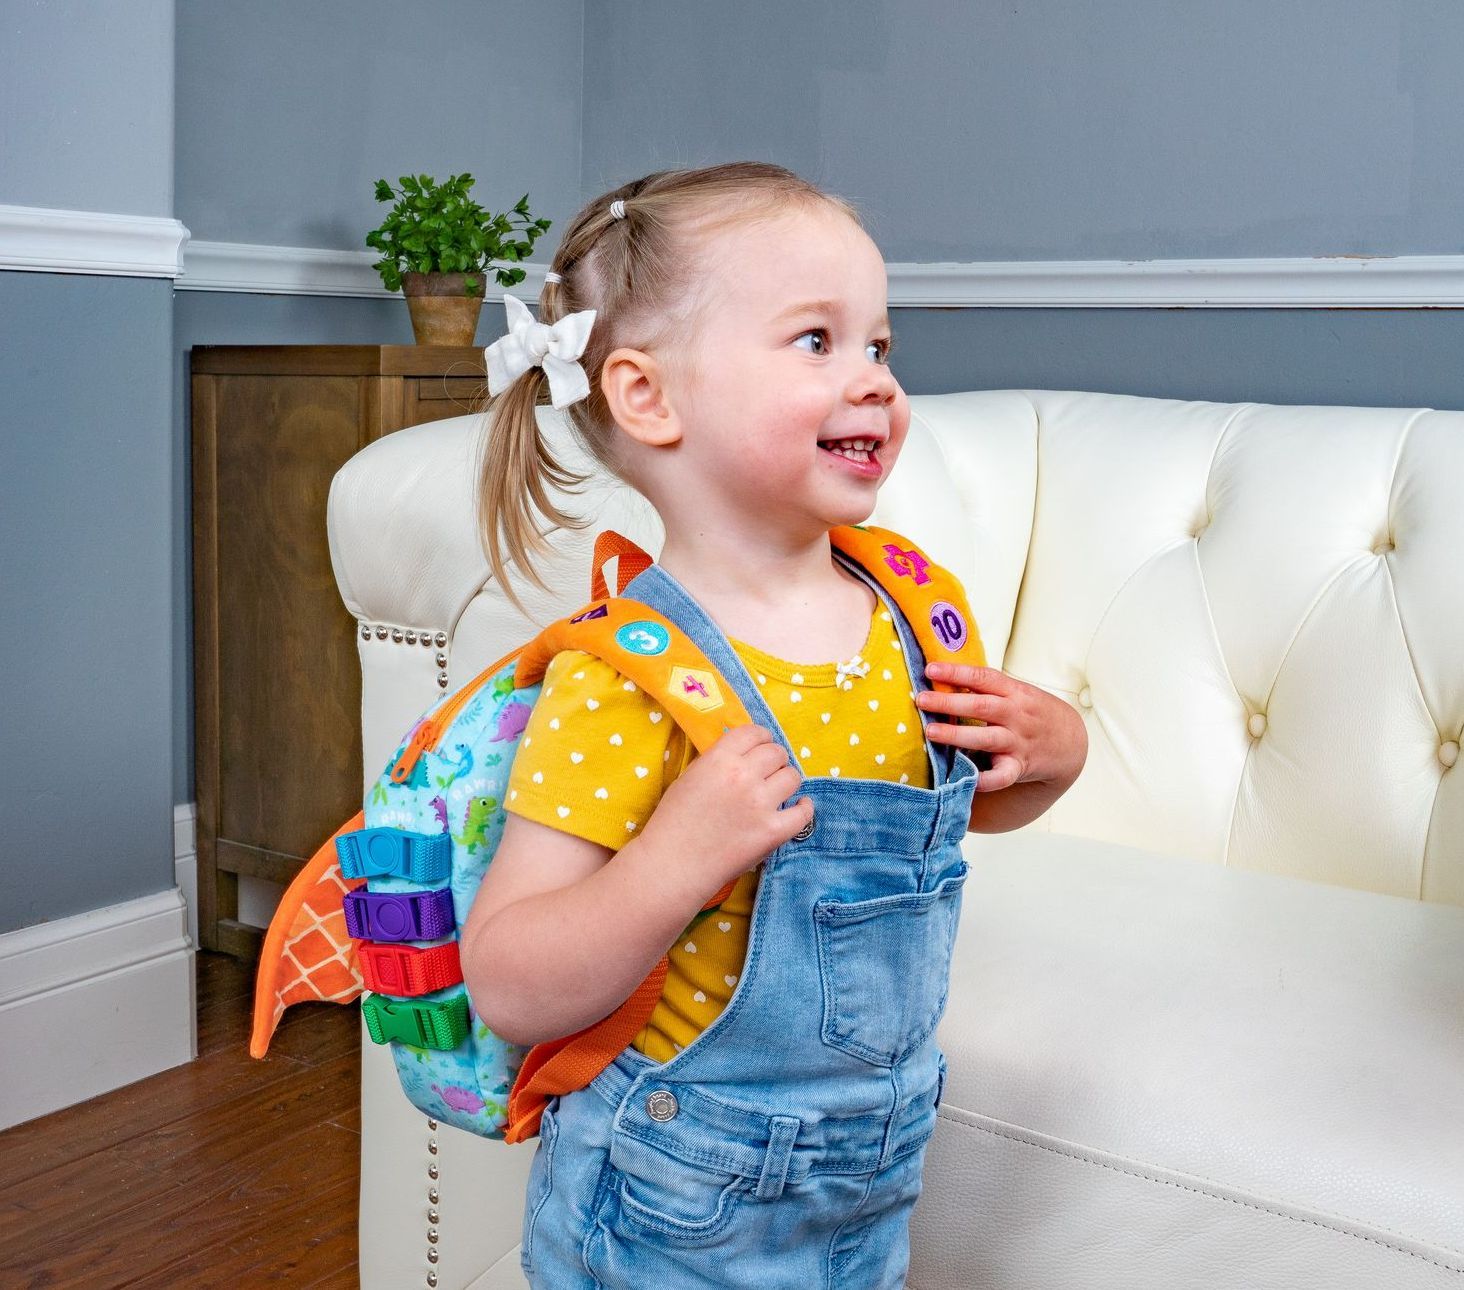 A little girl wearing overalls and a backpack is standing next to a couch.